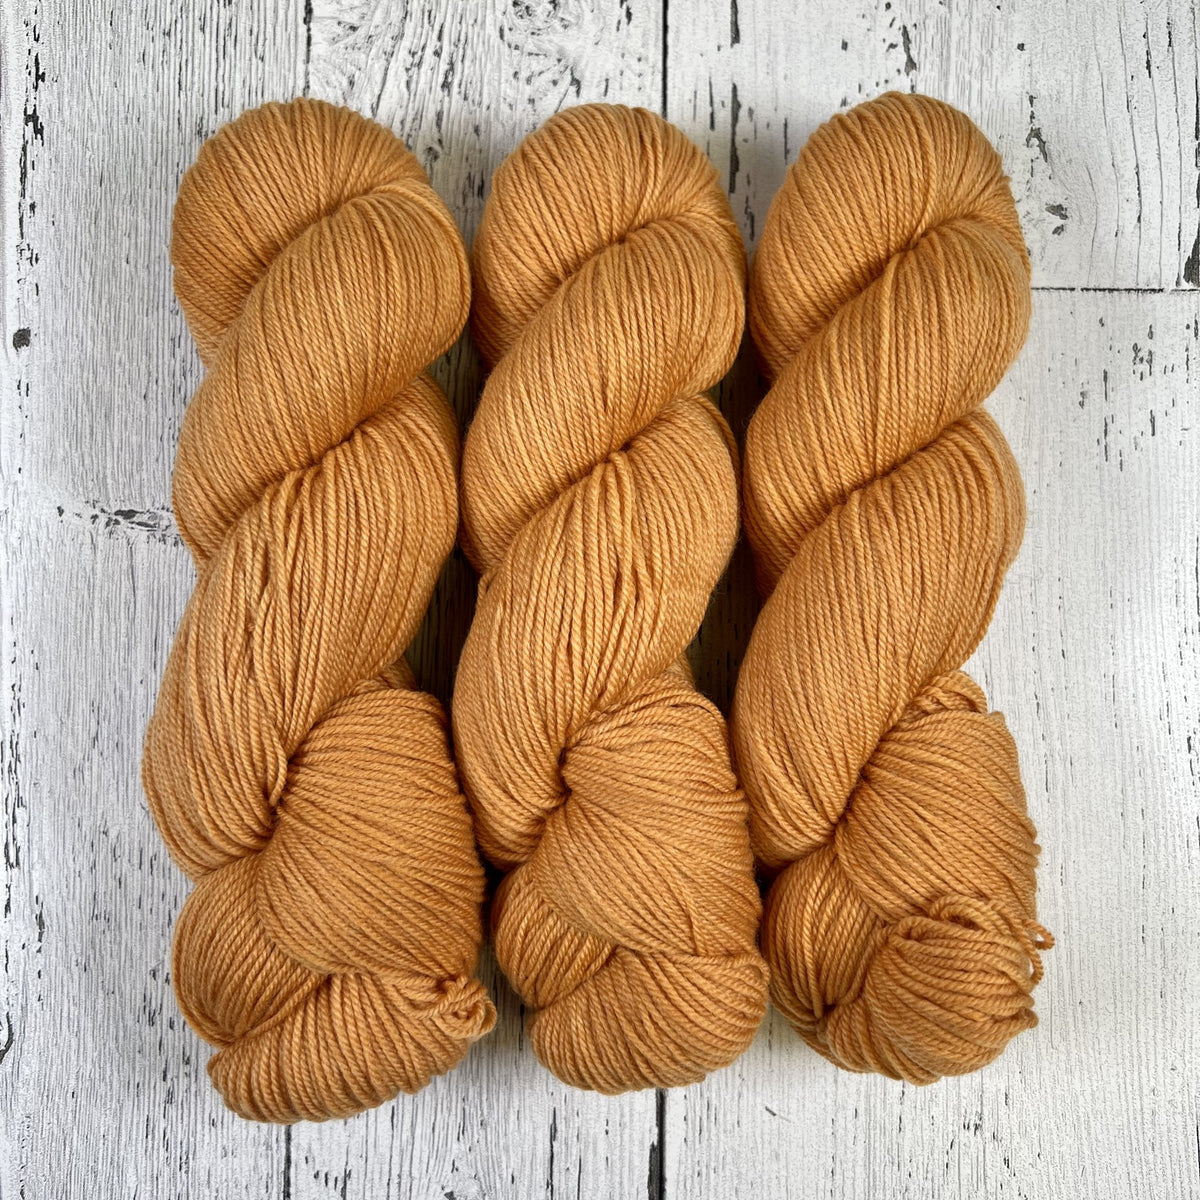 Apricot - Revival Fingering - Dyed Stock